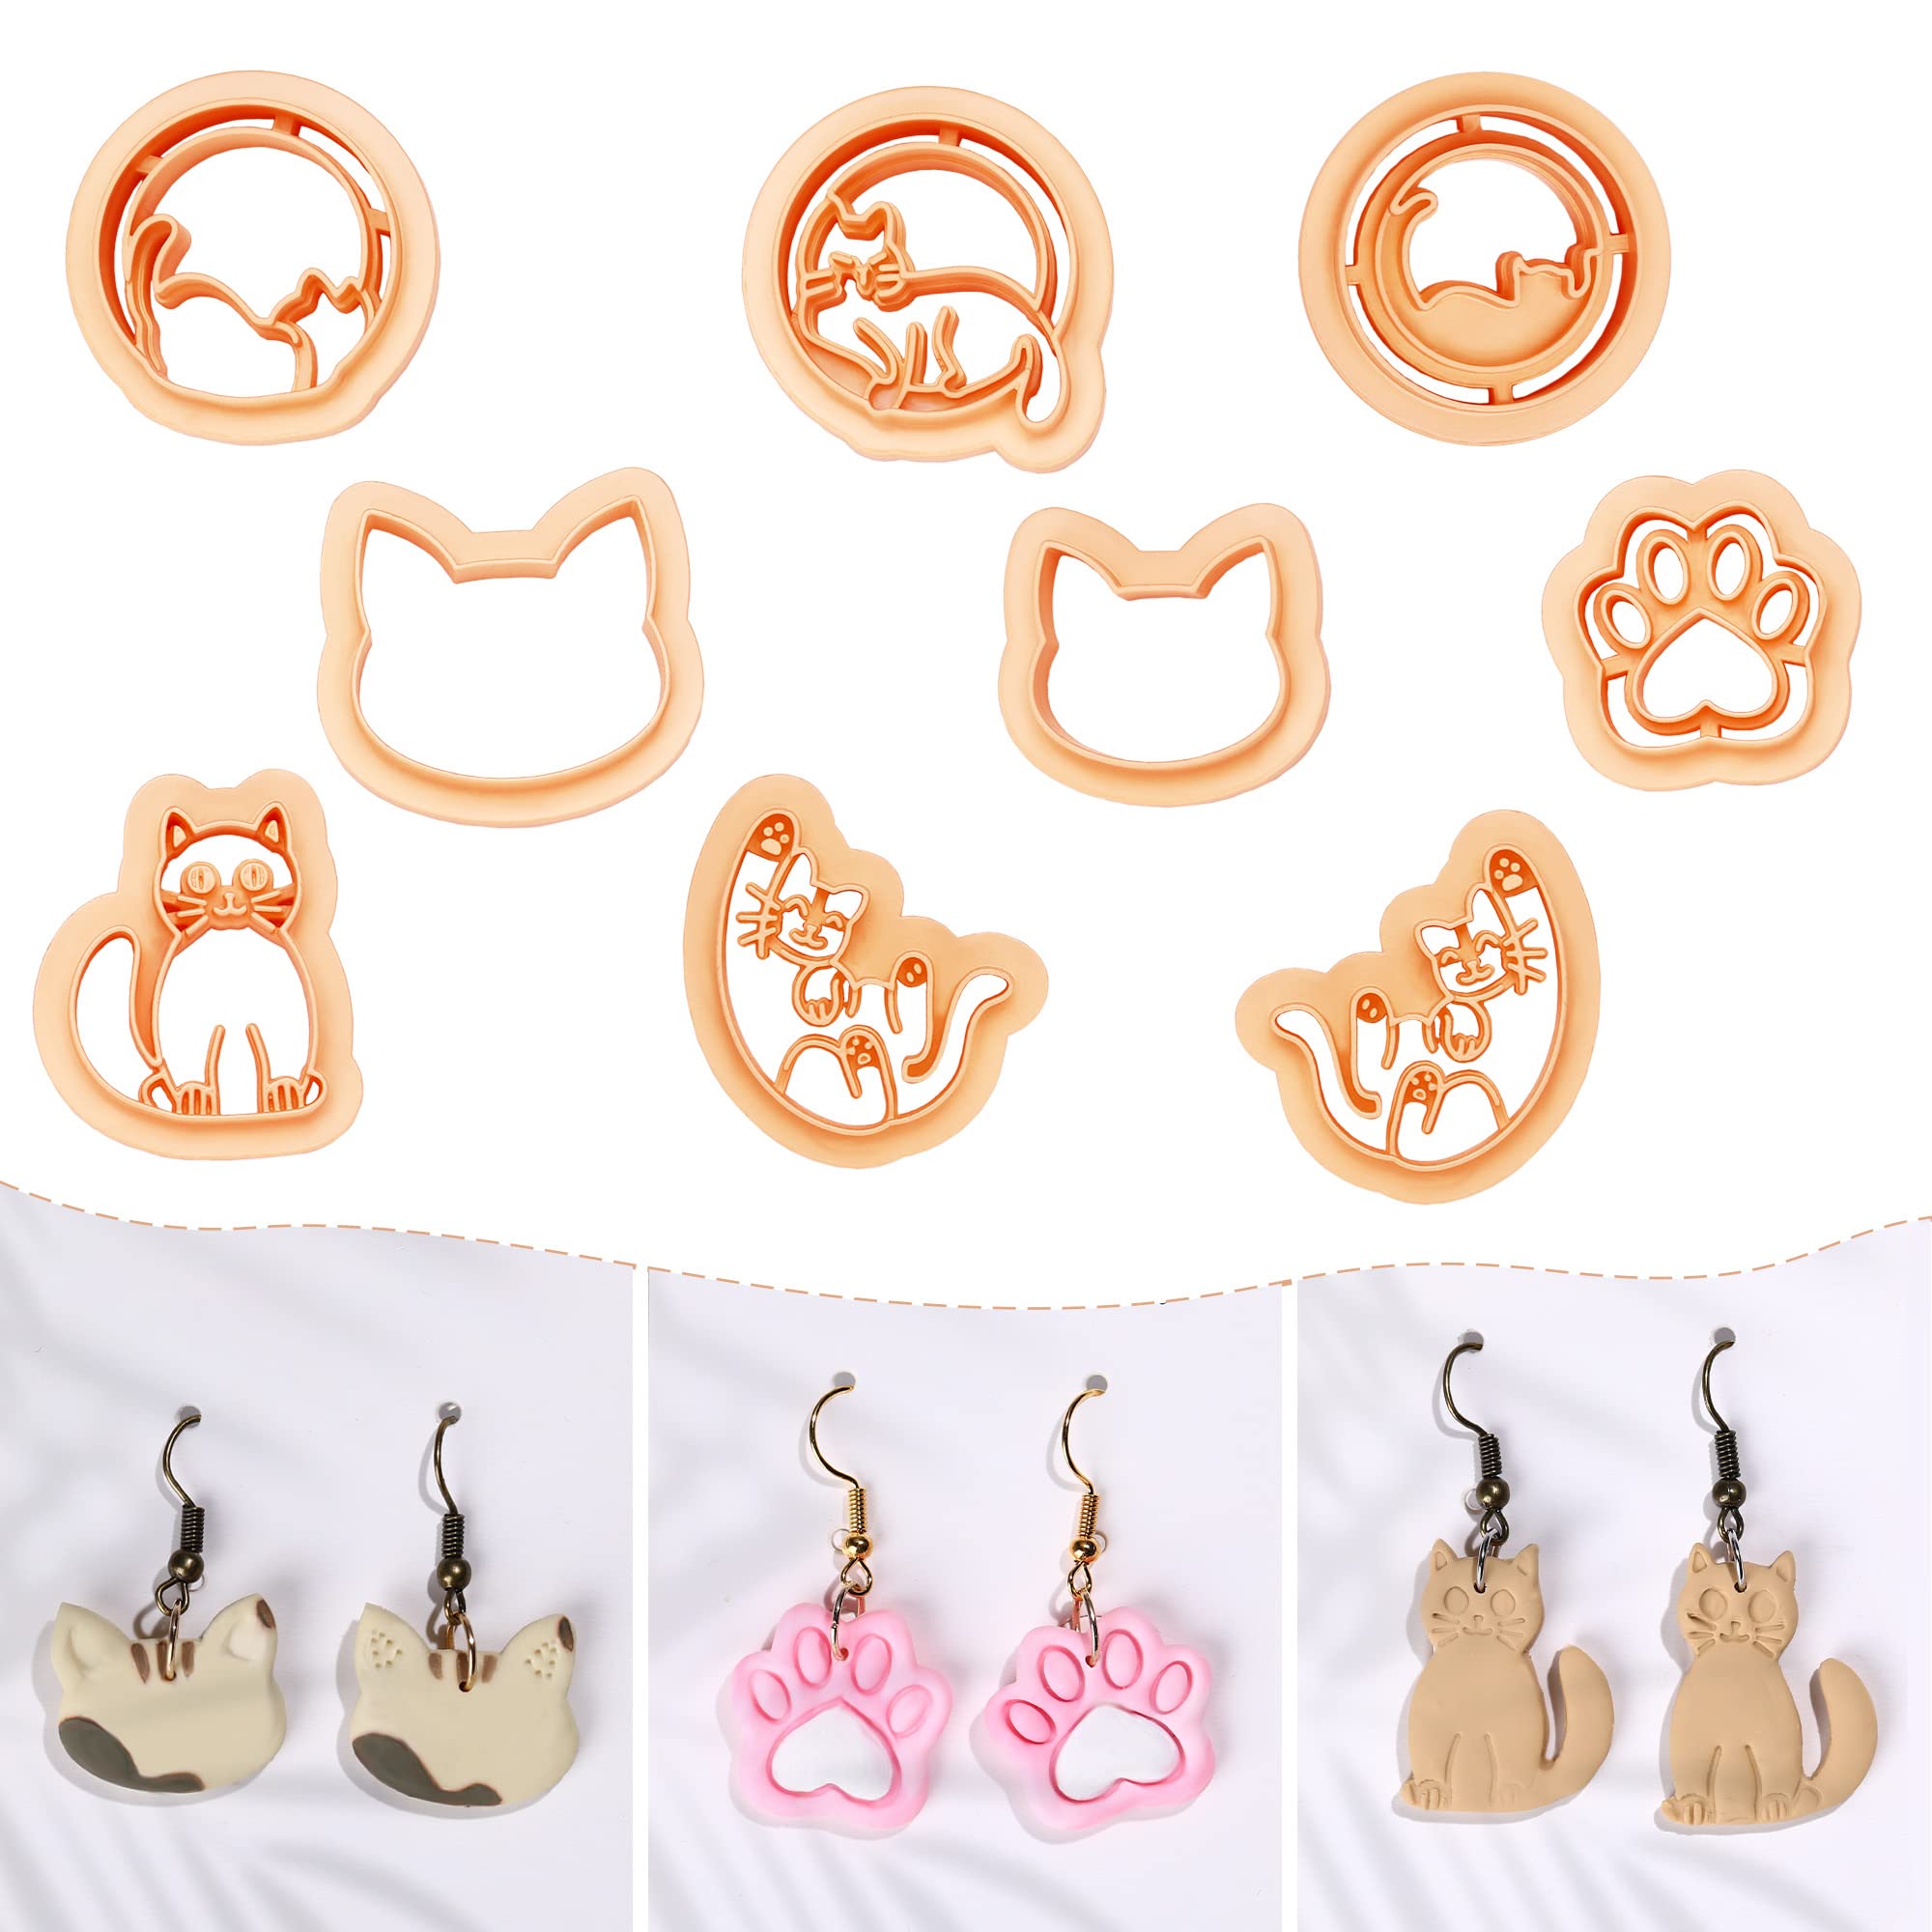  Puocaon Hot Pink Clay Earring Cutters, 12 Pcs Clay